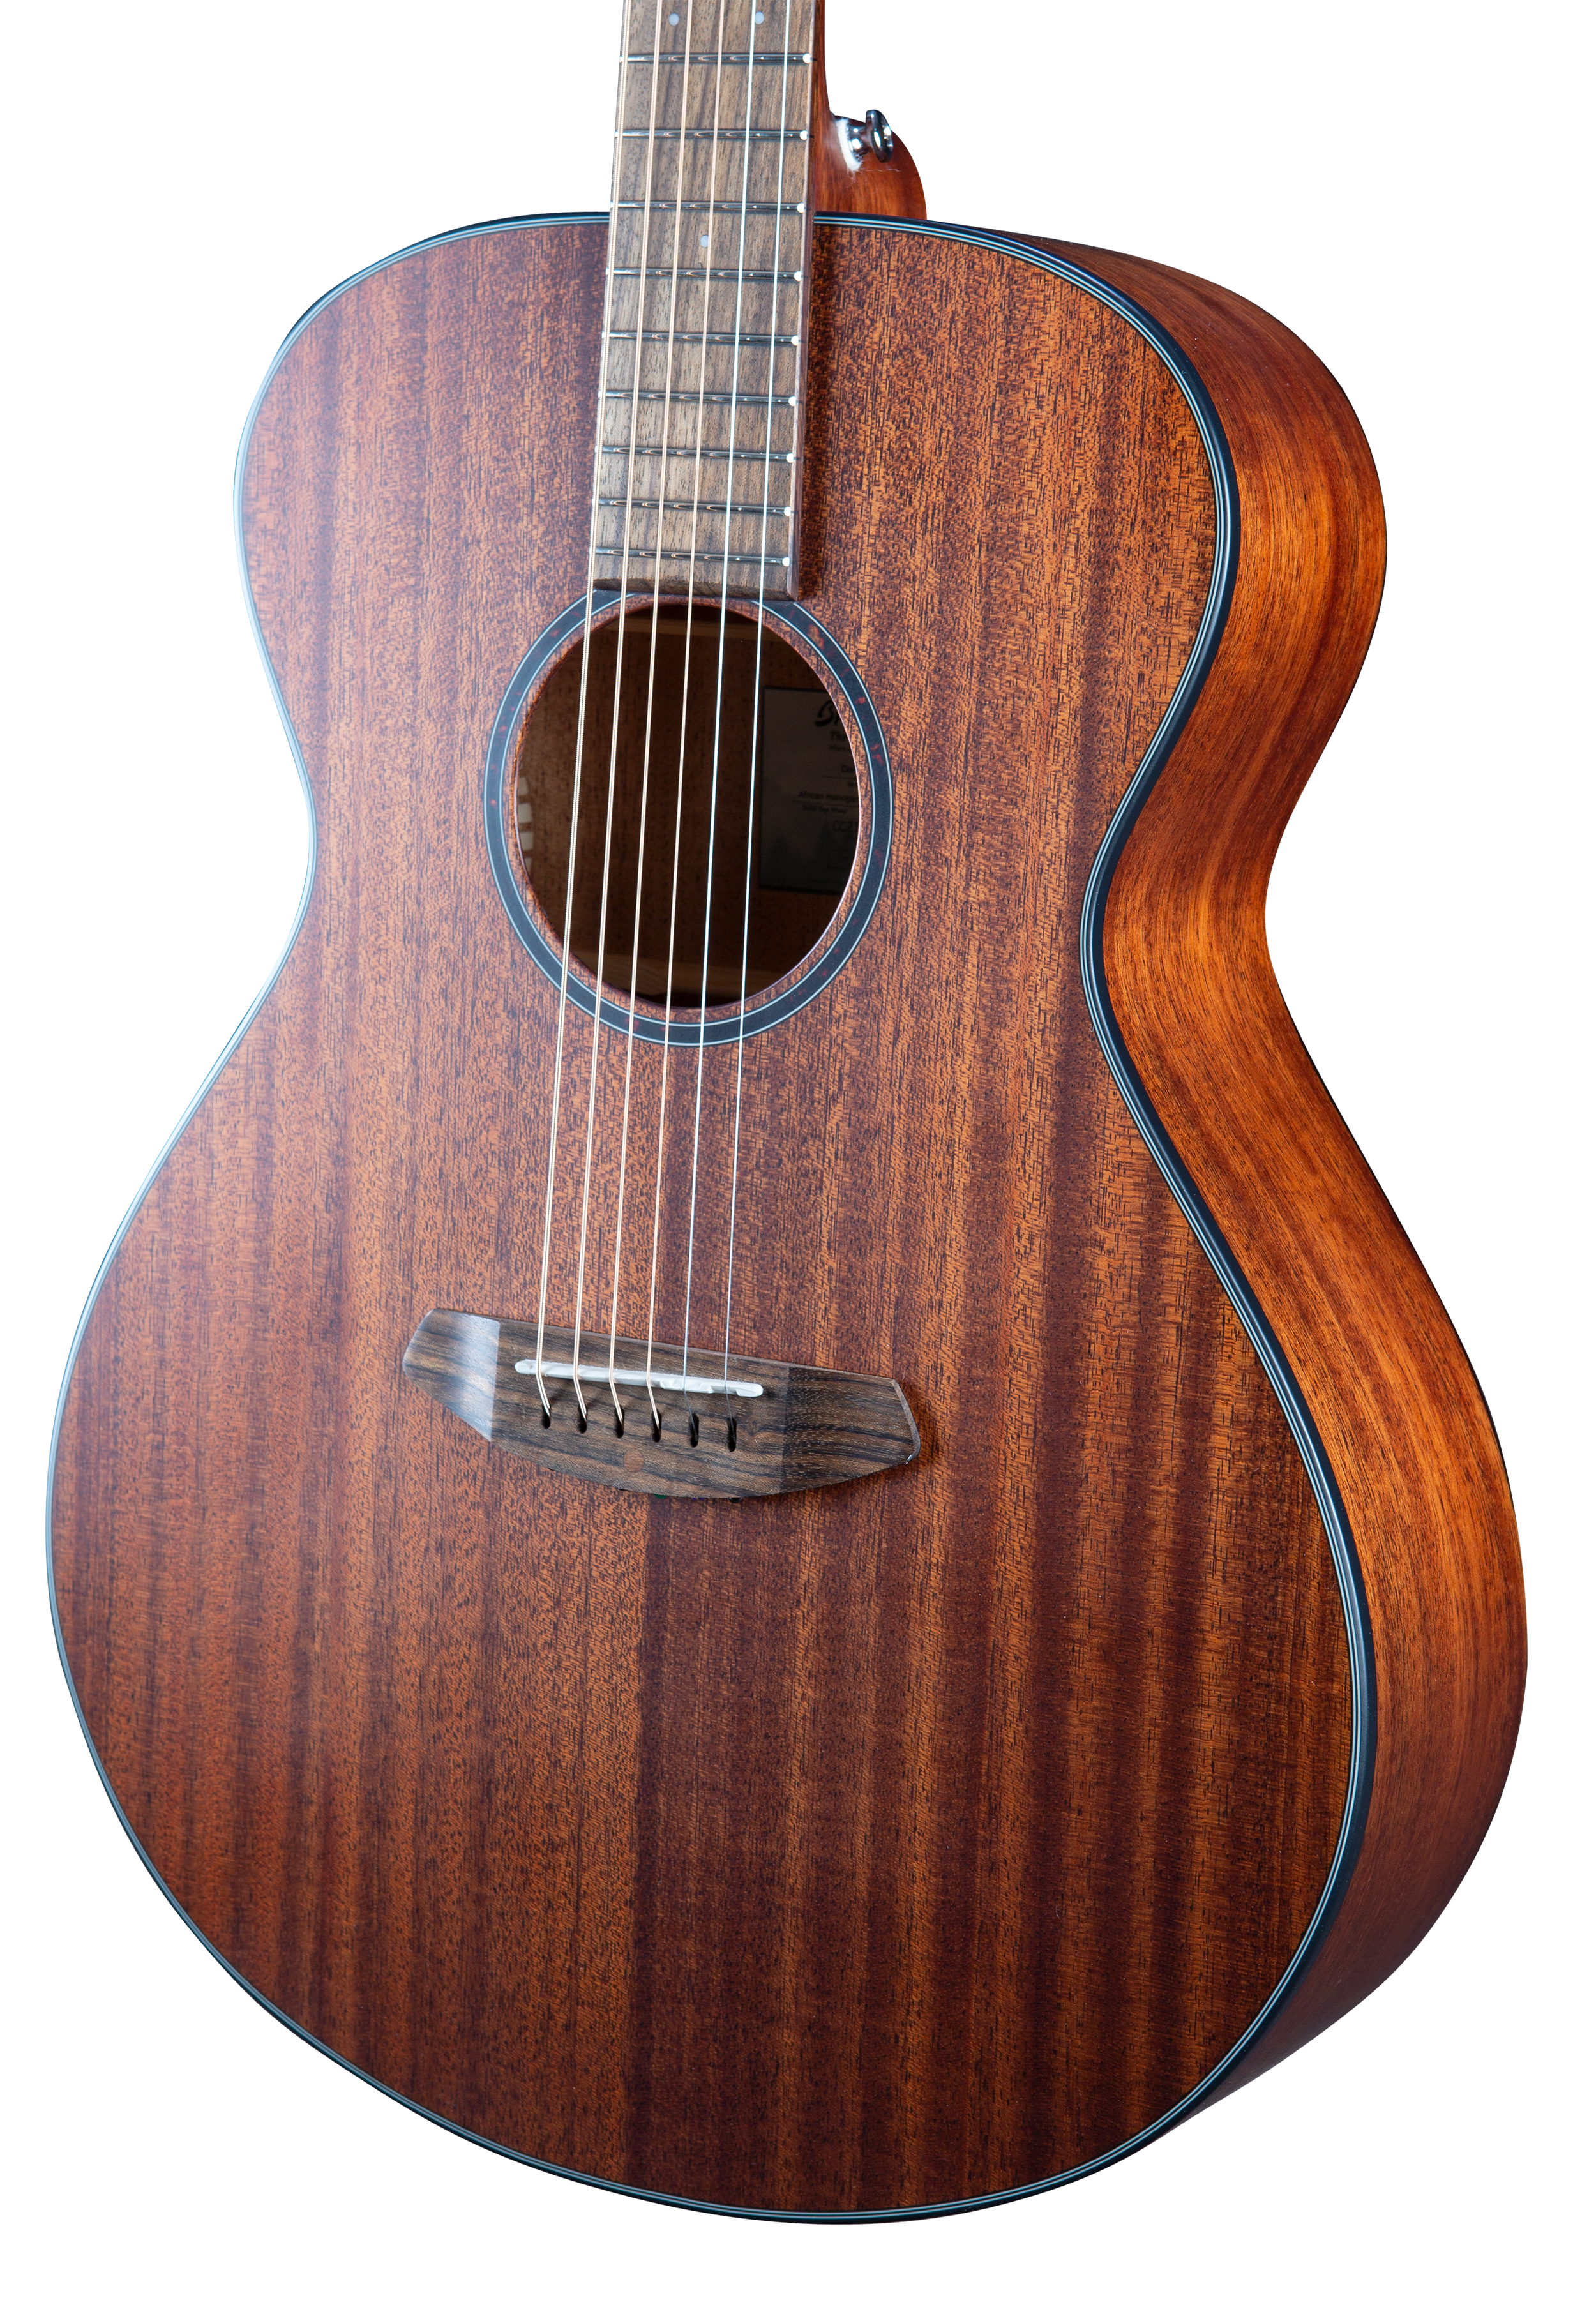 https://breedlovemusic.com/wp-content/uploads/2021/05/BREEDLOVE-ECO-COLLECTION-DISCOVERY-GUITARS-CONCERT-MAHOGANY-Facu.png